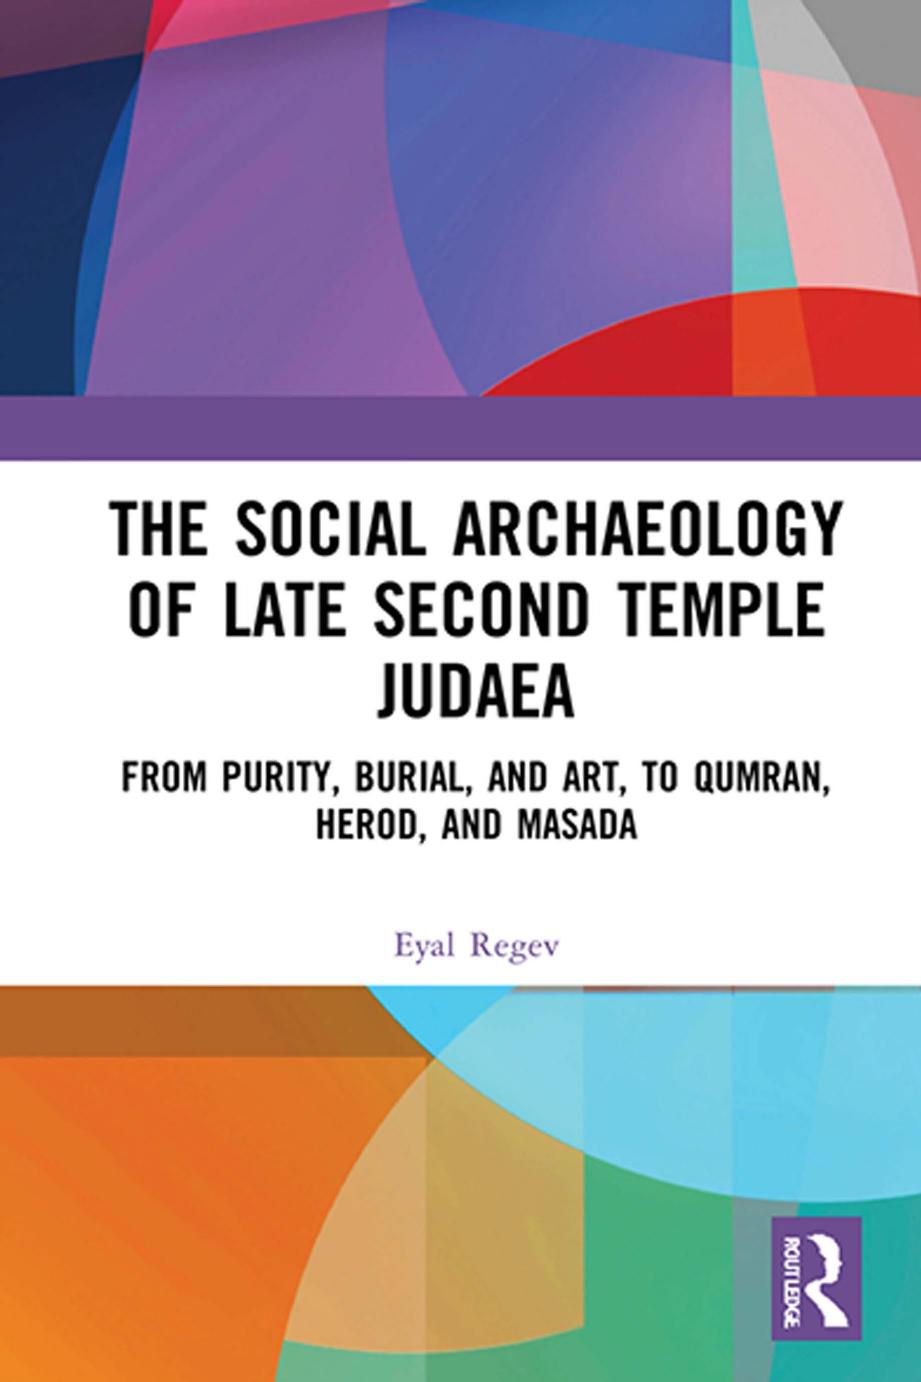 The Social Archaeology of Late Second Temple Judaea; From Purity, Burial, and Art, to Qumran, Herod, and Masada by Eyal Regev